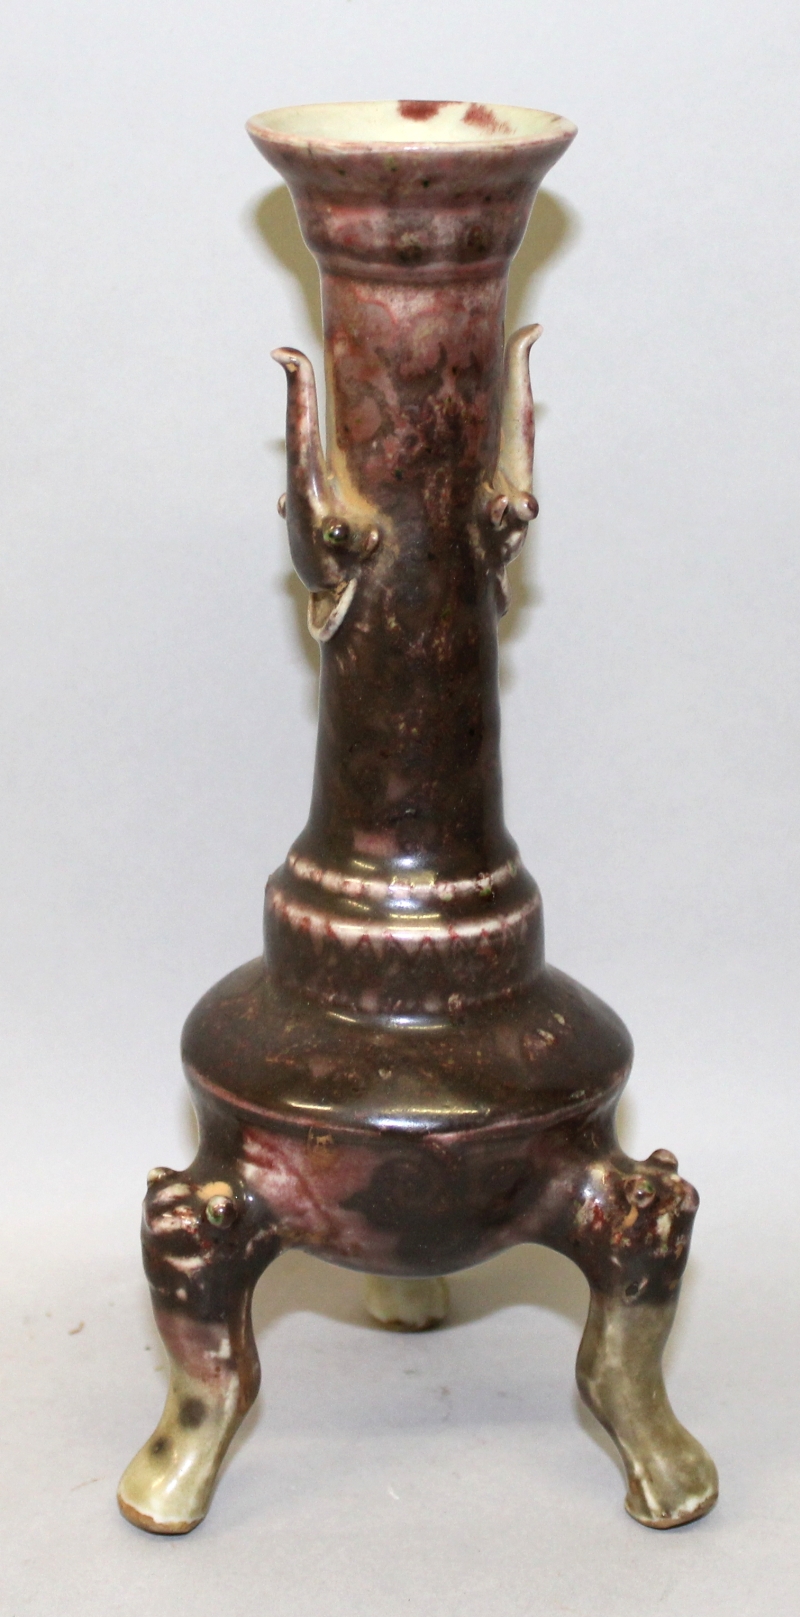 AN UNUSUAL CHINESE PORCELAIN TRIPOD CANDLESTICK, applied with a purple-red glaze and with inverted